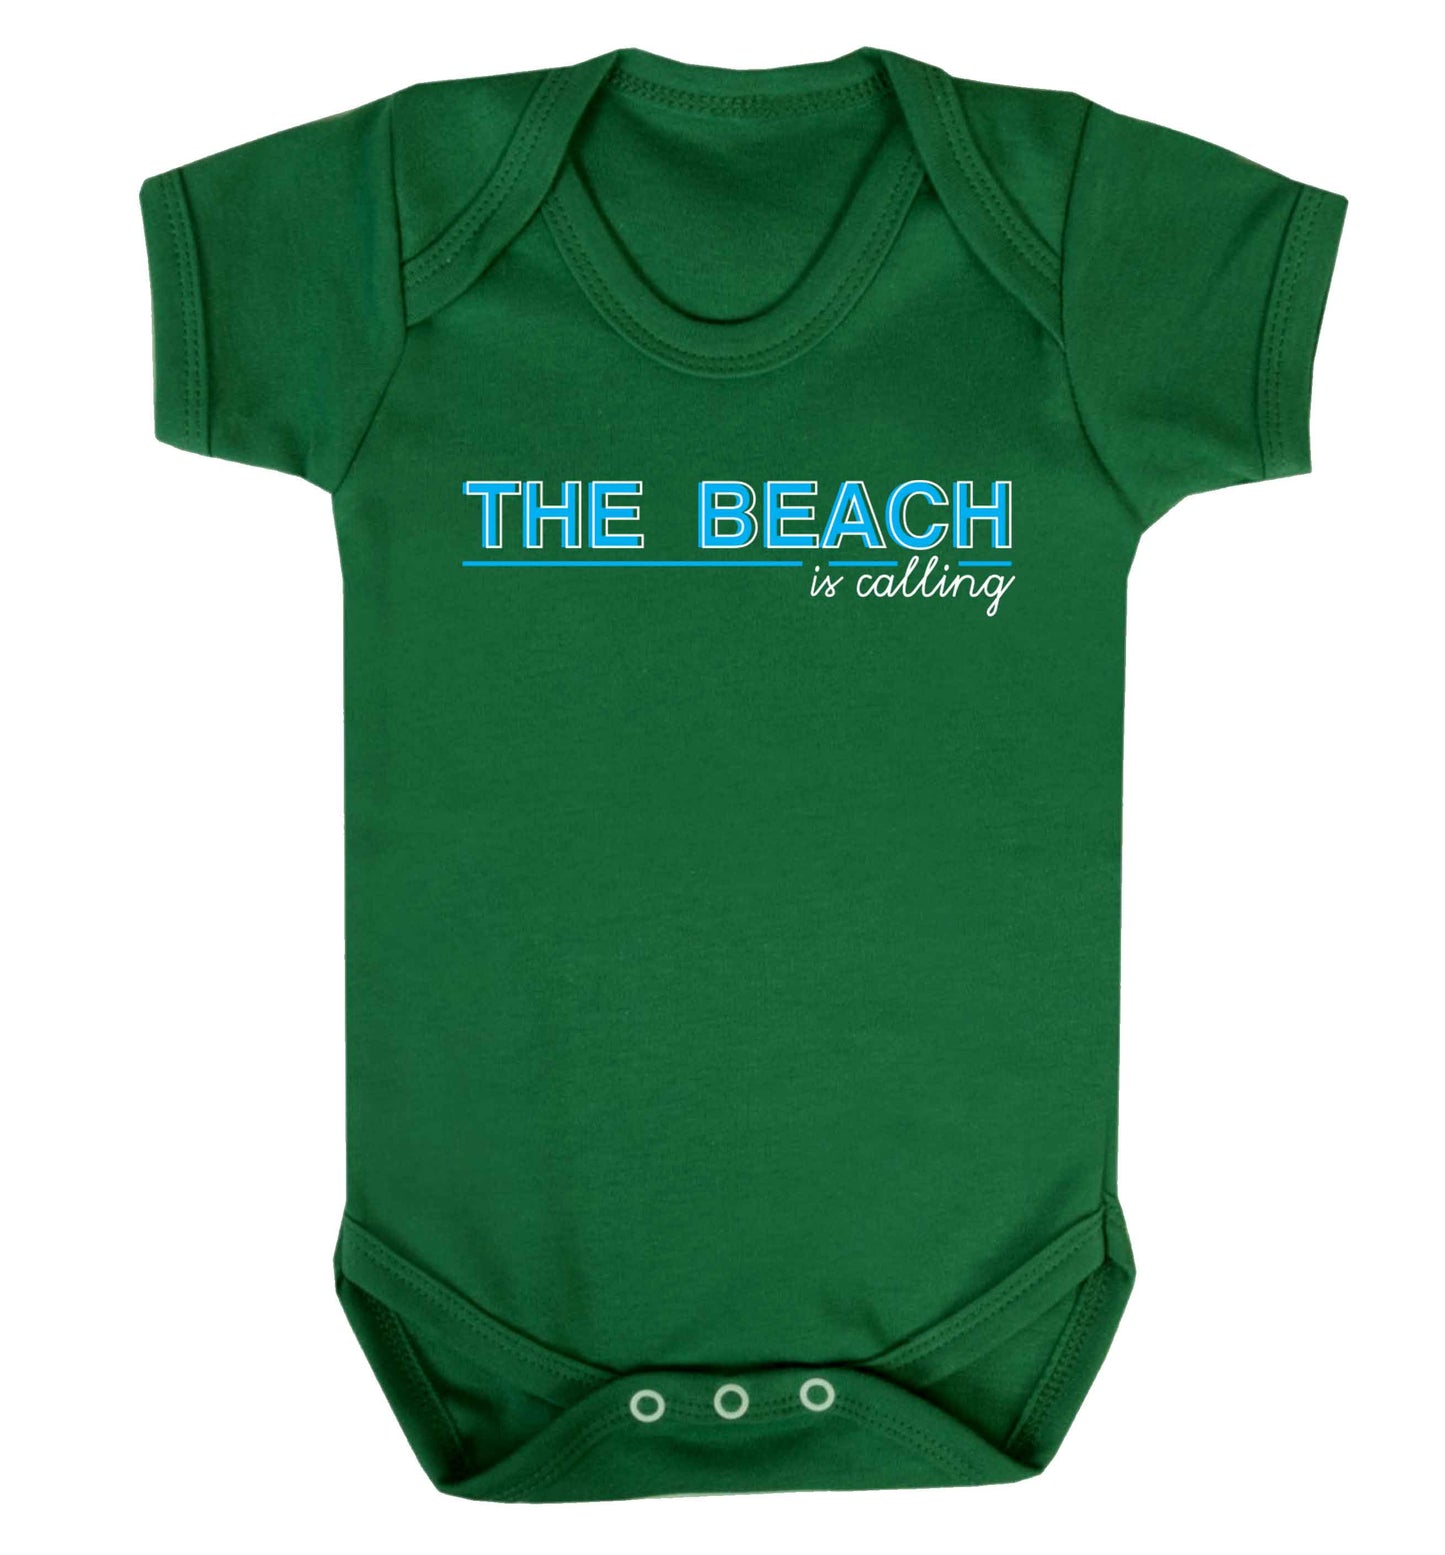 The beach is calling Baby Vest green 18-24 months